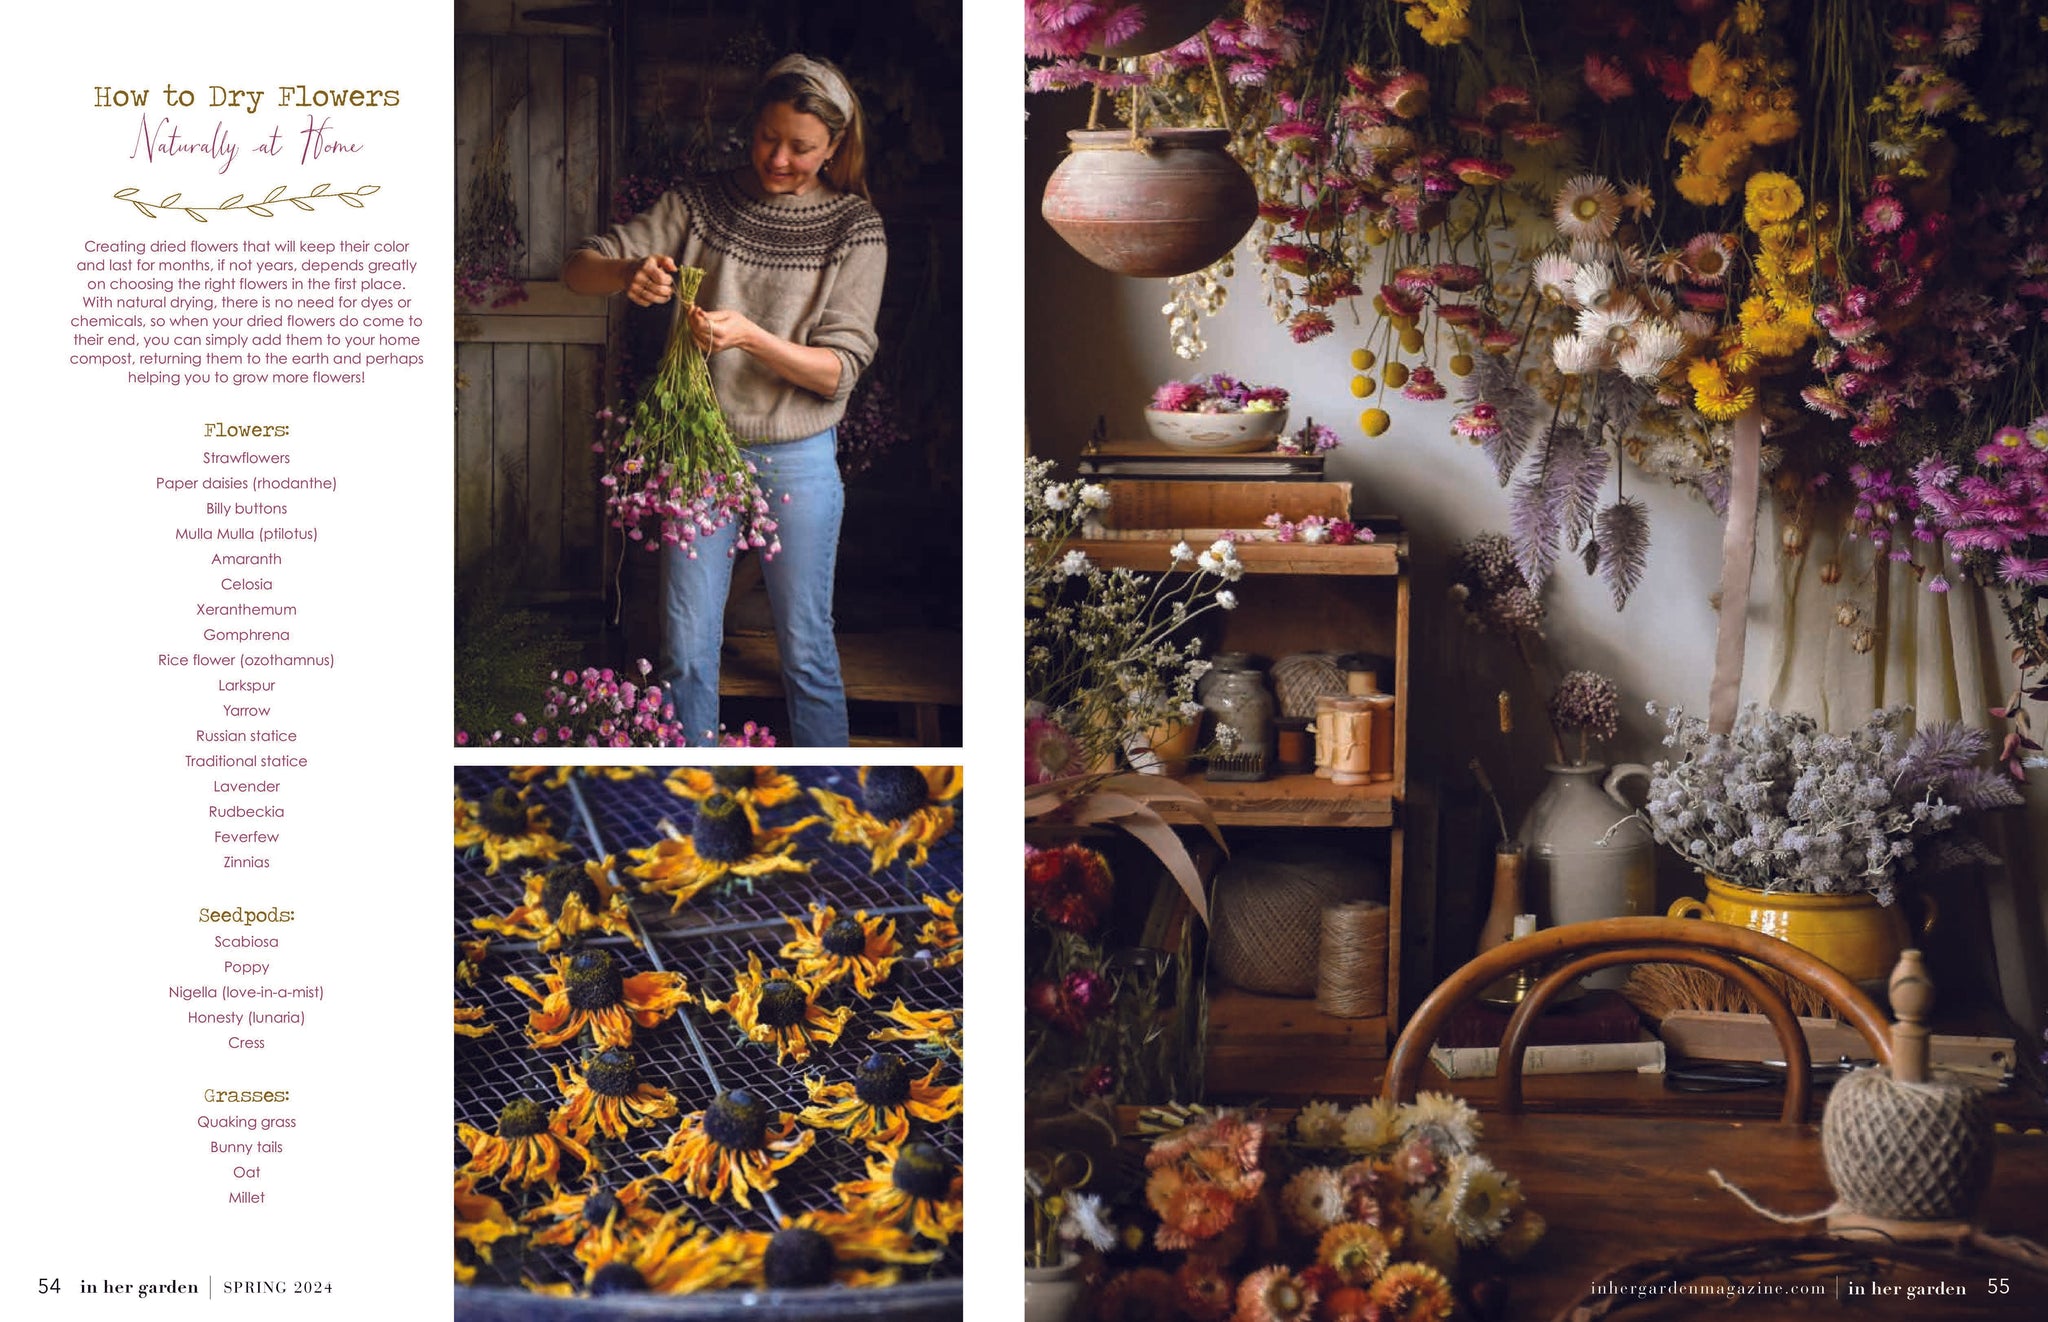 dried flowers australia amble and twine as seen in in her garden magazine